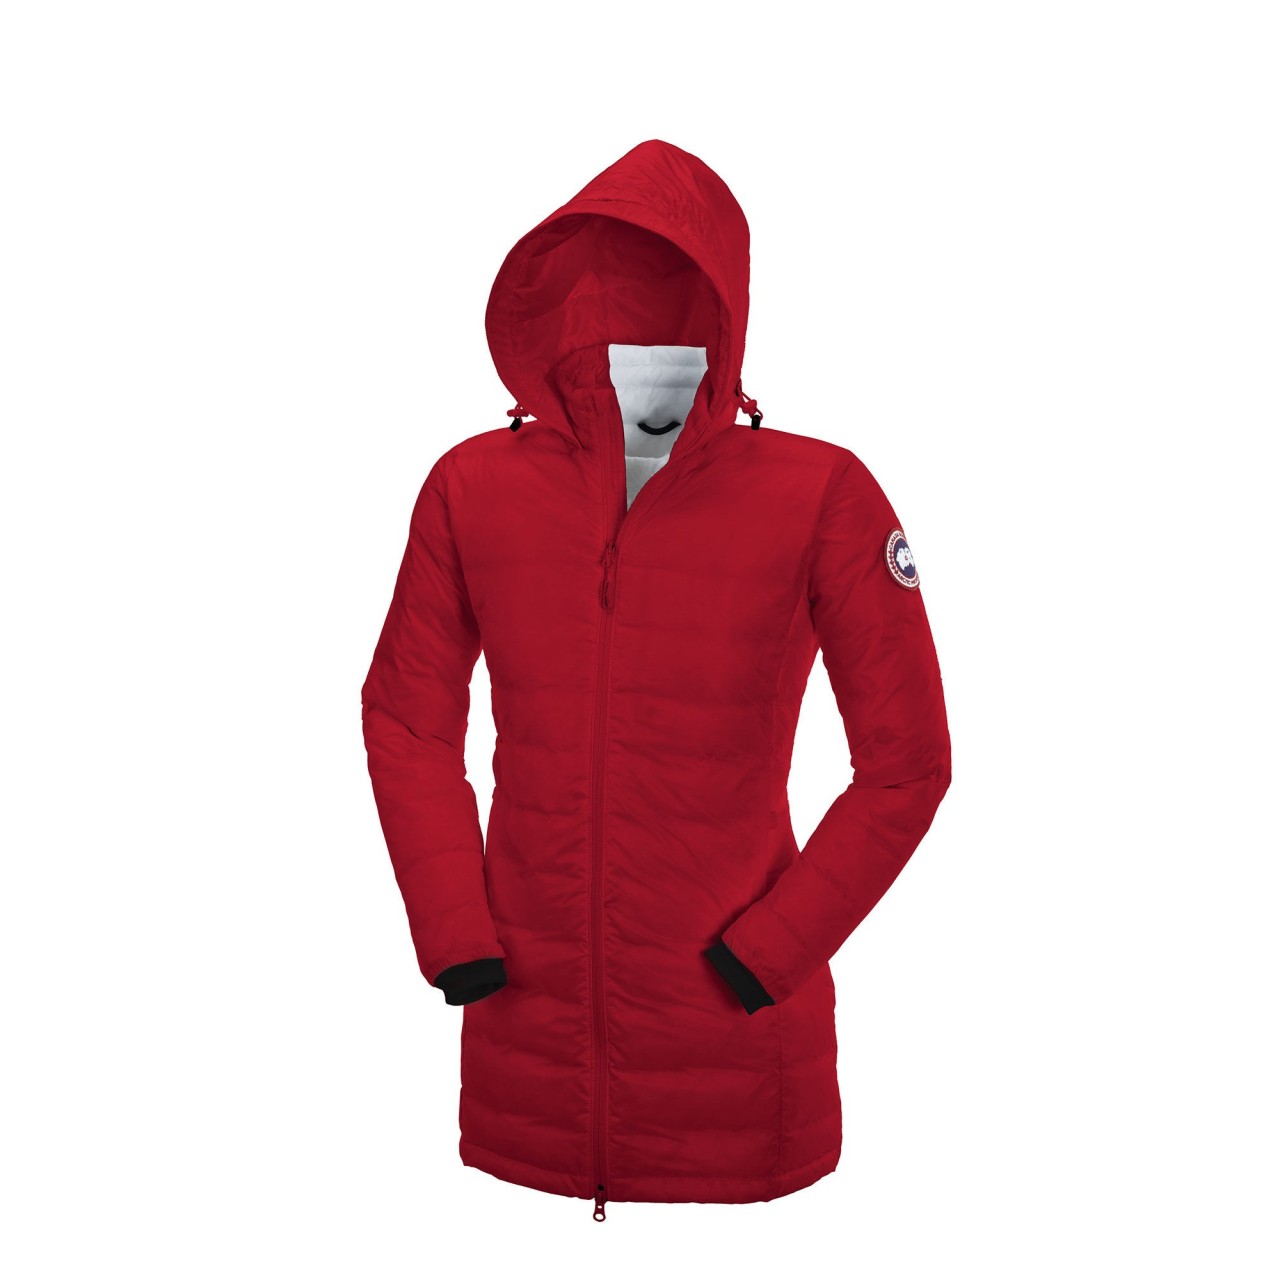 Canada Goose womens outlet shop - 70% Off Cheap Canada Goose Jackets Sale